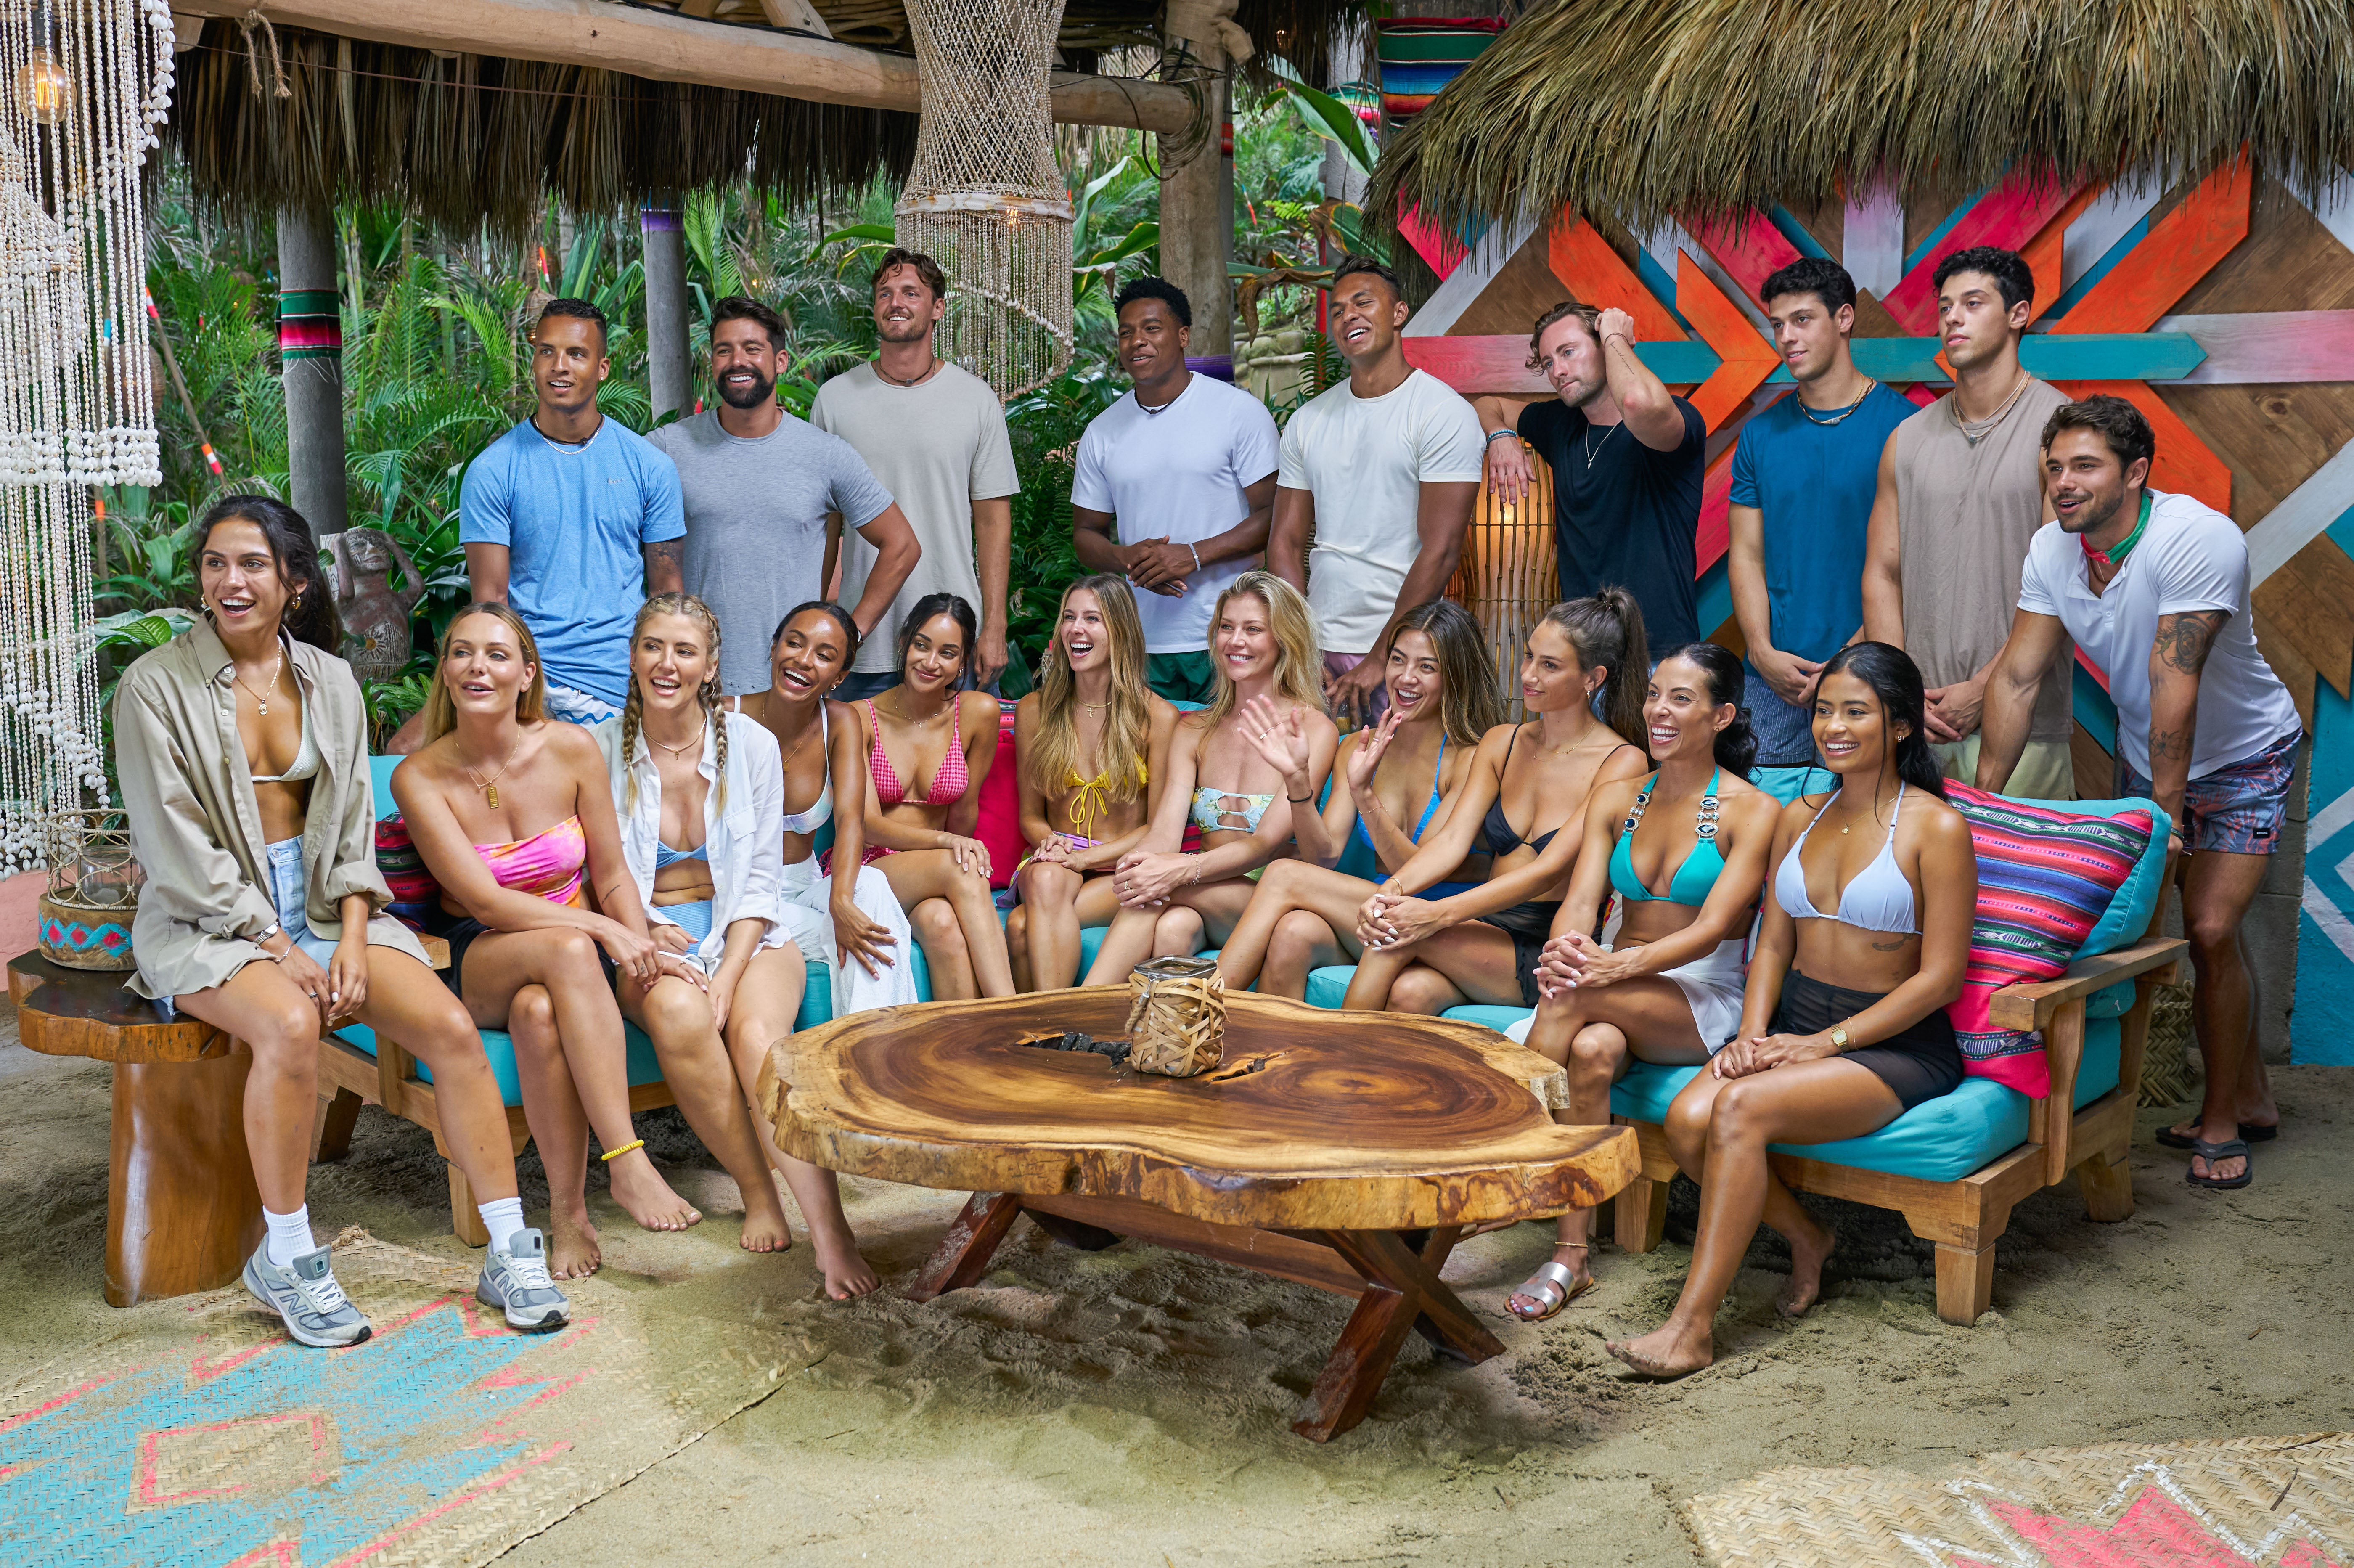 Bachelor In Paradise' 2022: Everything We Know